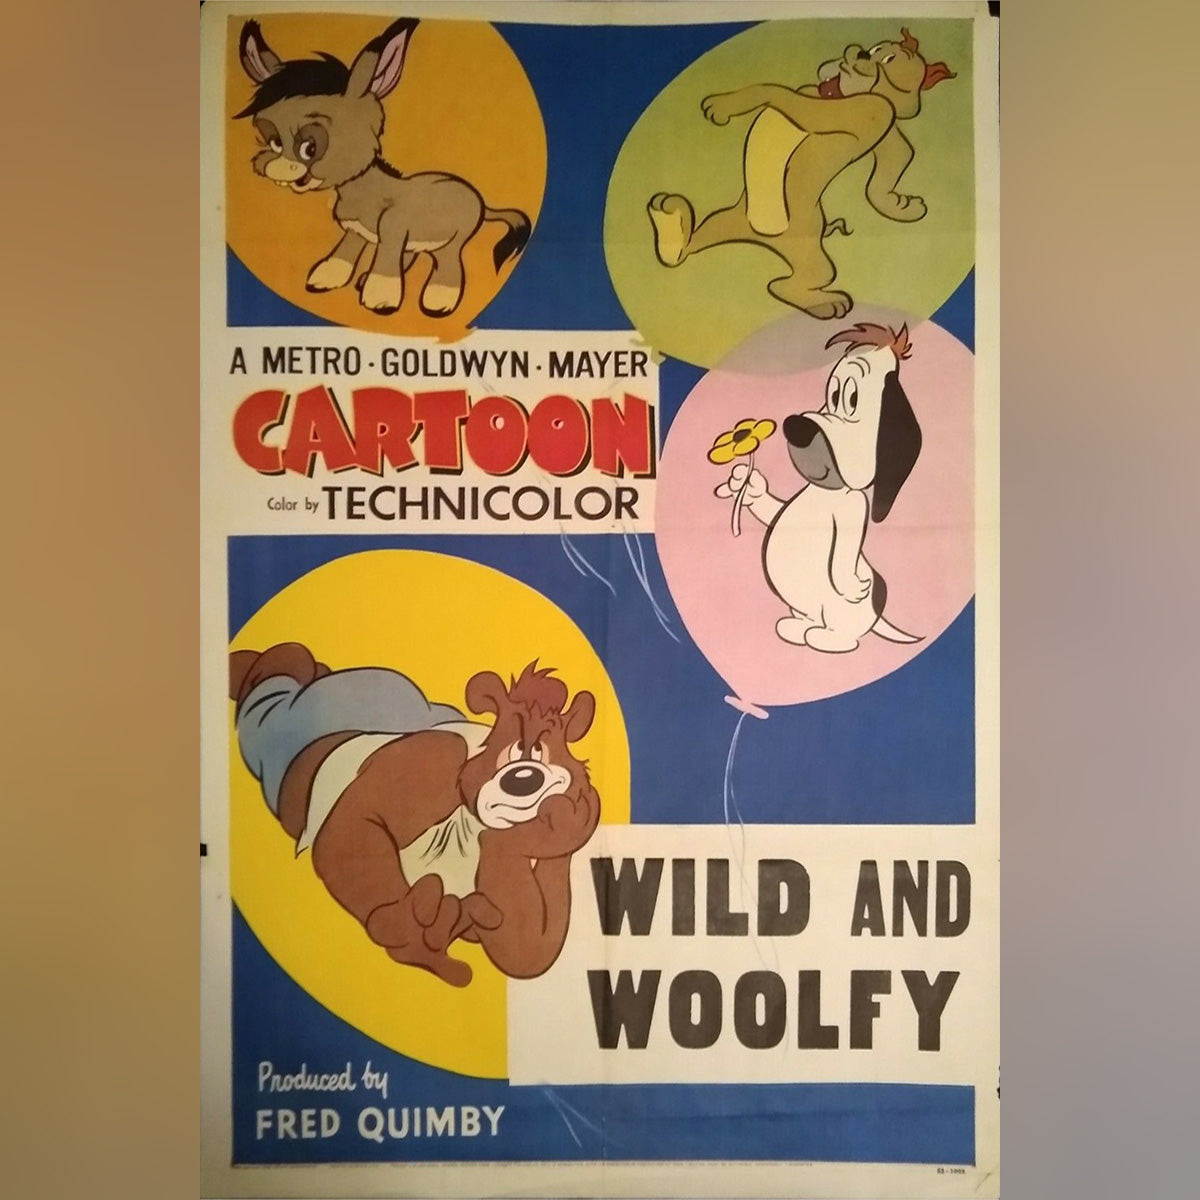 Original Movie Poster of Wild And Woolfy (1952)